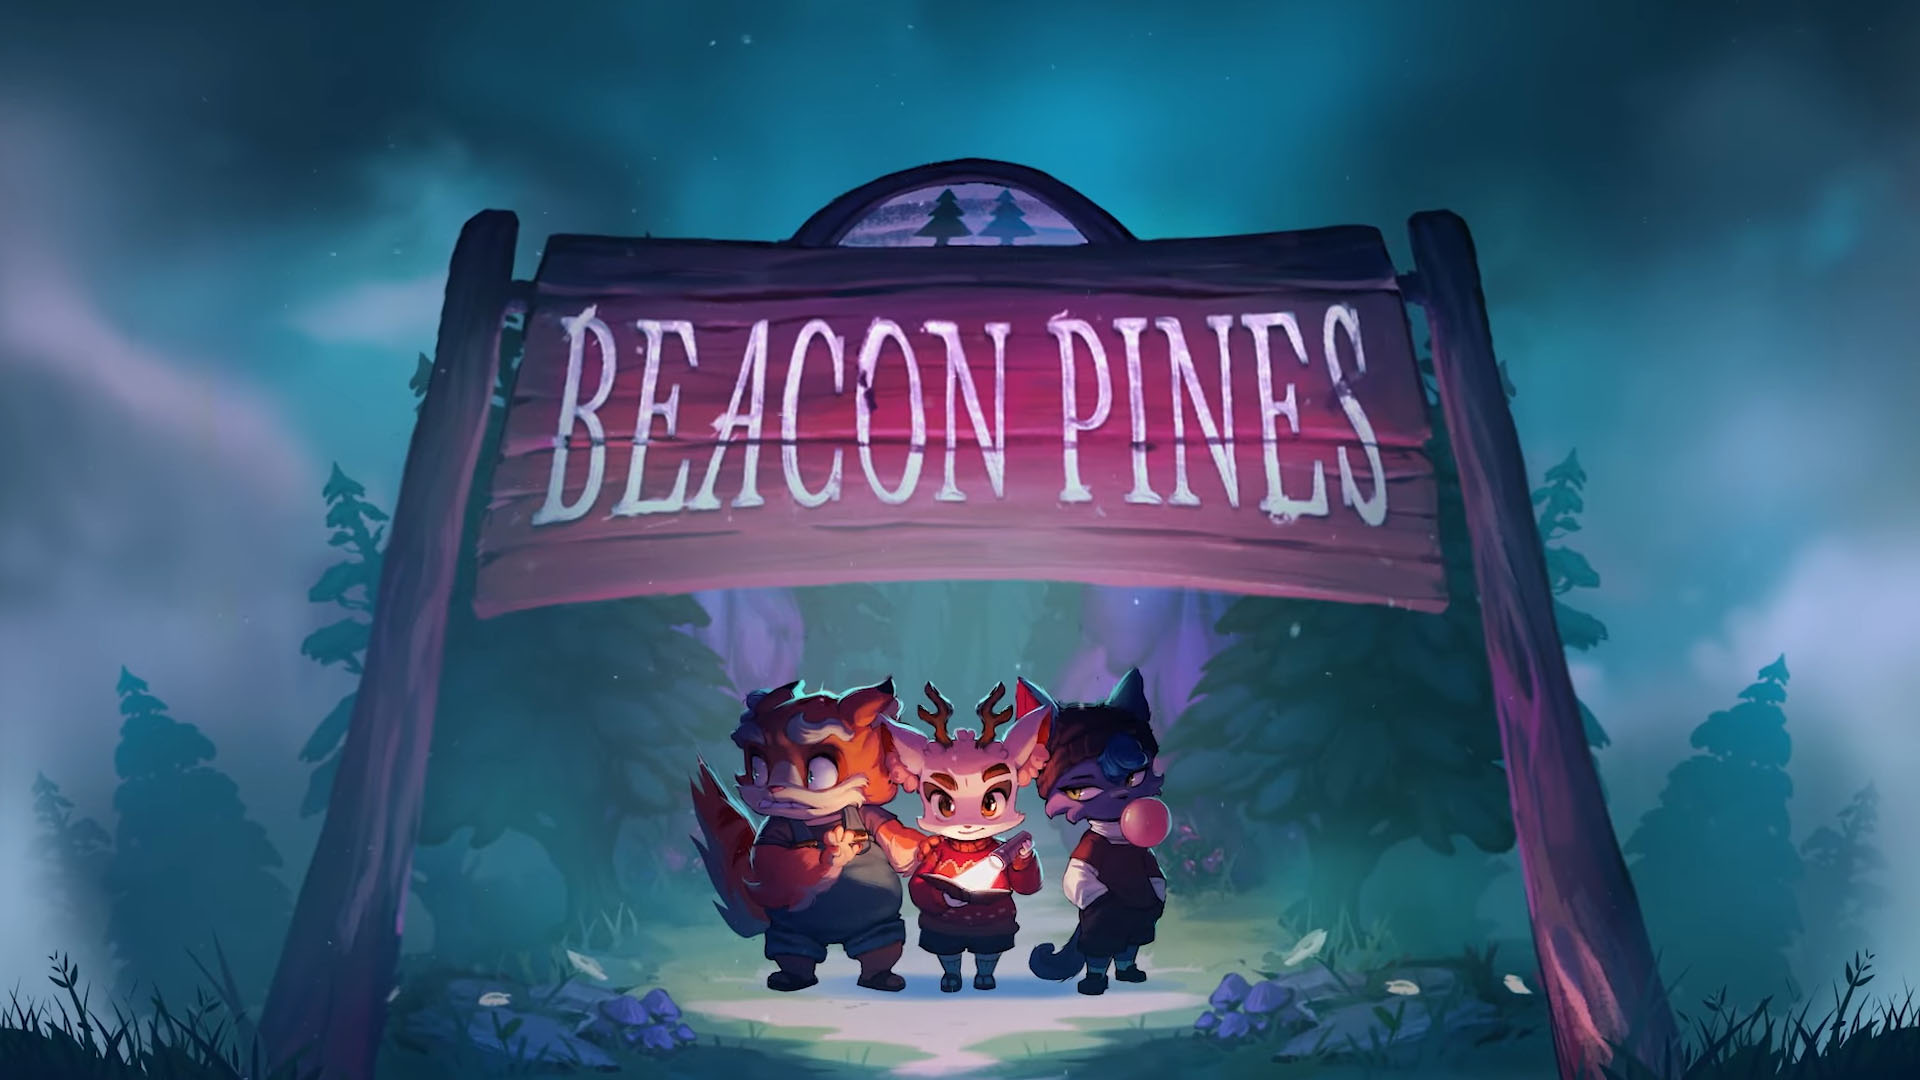 Cute and creepy' adventure game Beacon Pines launches September 22 for Xbox One, Switch, and PC